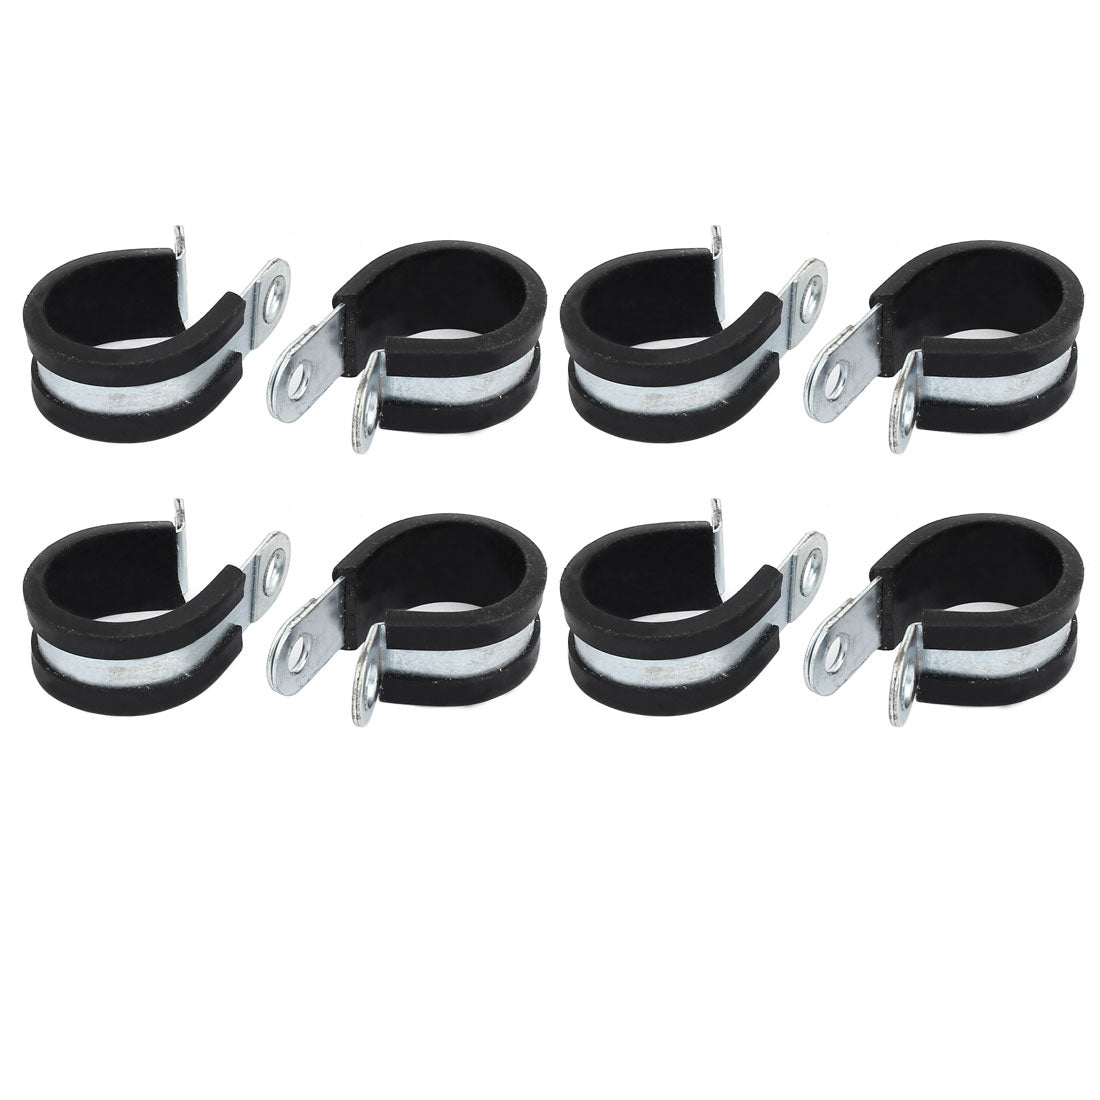 uxcell Uxcell 25mm Dia Rubber Lined R Shaped Zinc Plated Pipe Clip Cable Clamp 8pcs